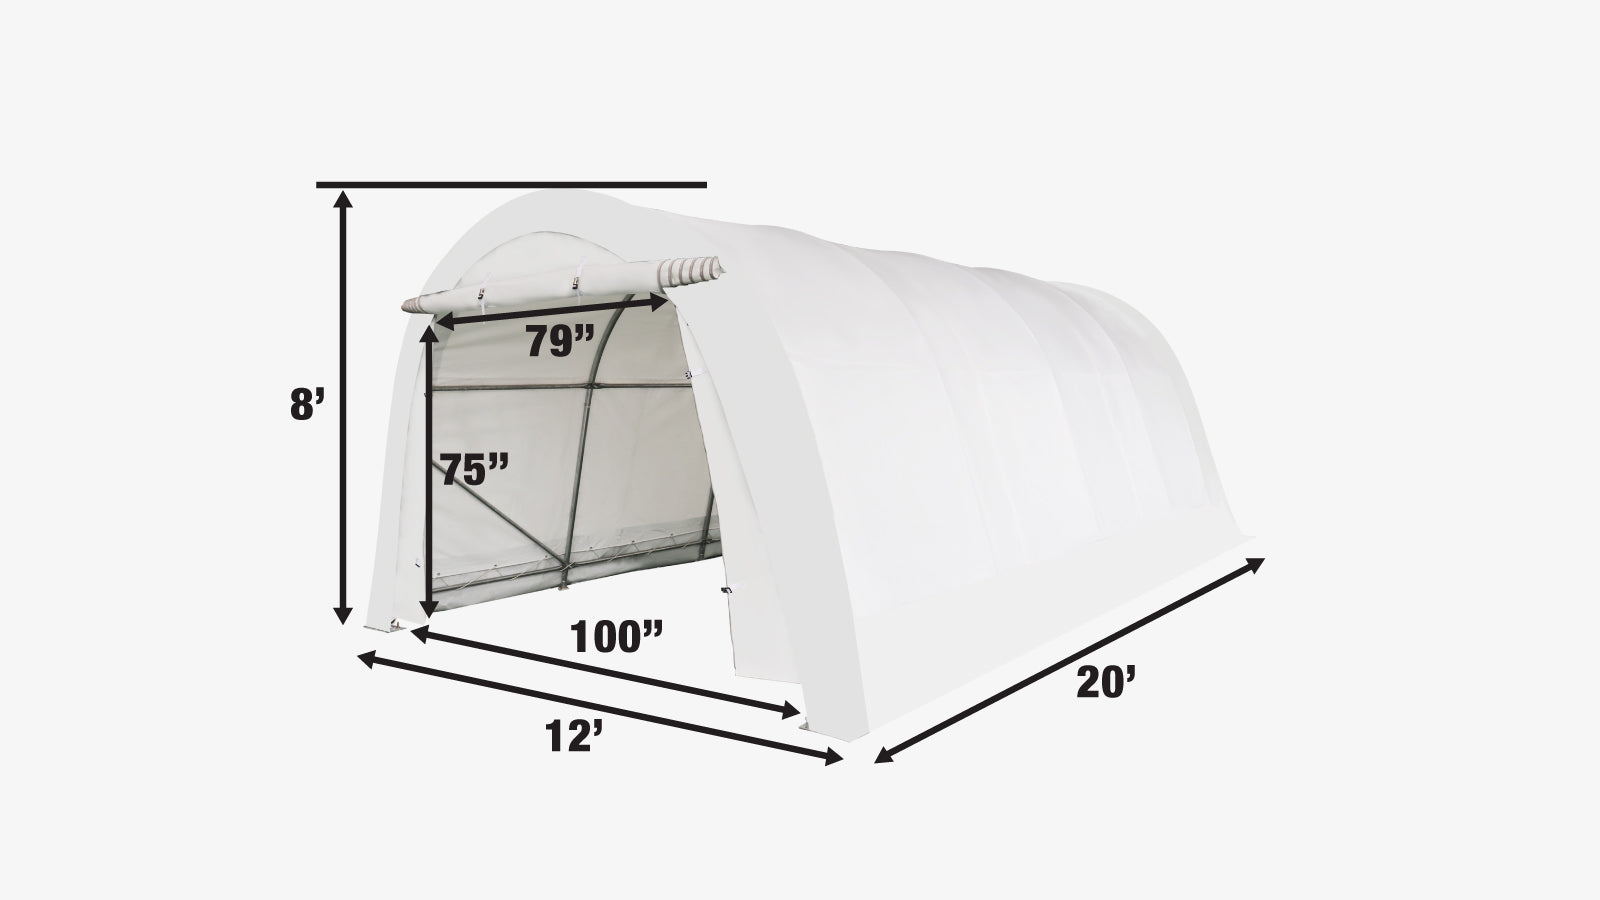 TMG Industrial 12’ x 20’ Car Shelter w/Rounded Roof & Heavy-Duty 11 OZ PE Fabric Cover, Galvanized Steel Frame, Roll-Up Doors, TMG-ST1220R-specifications-image